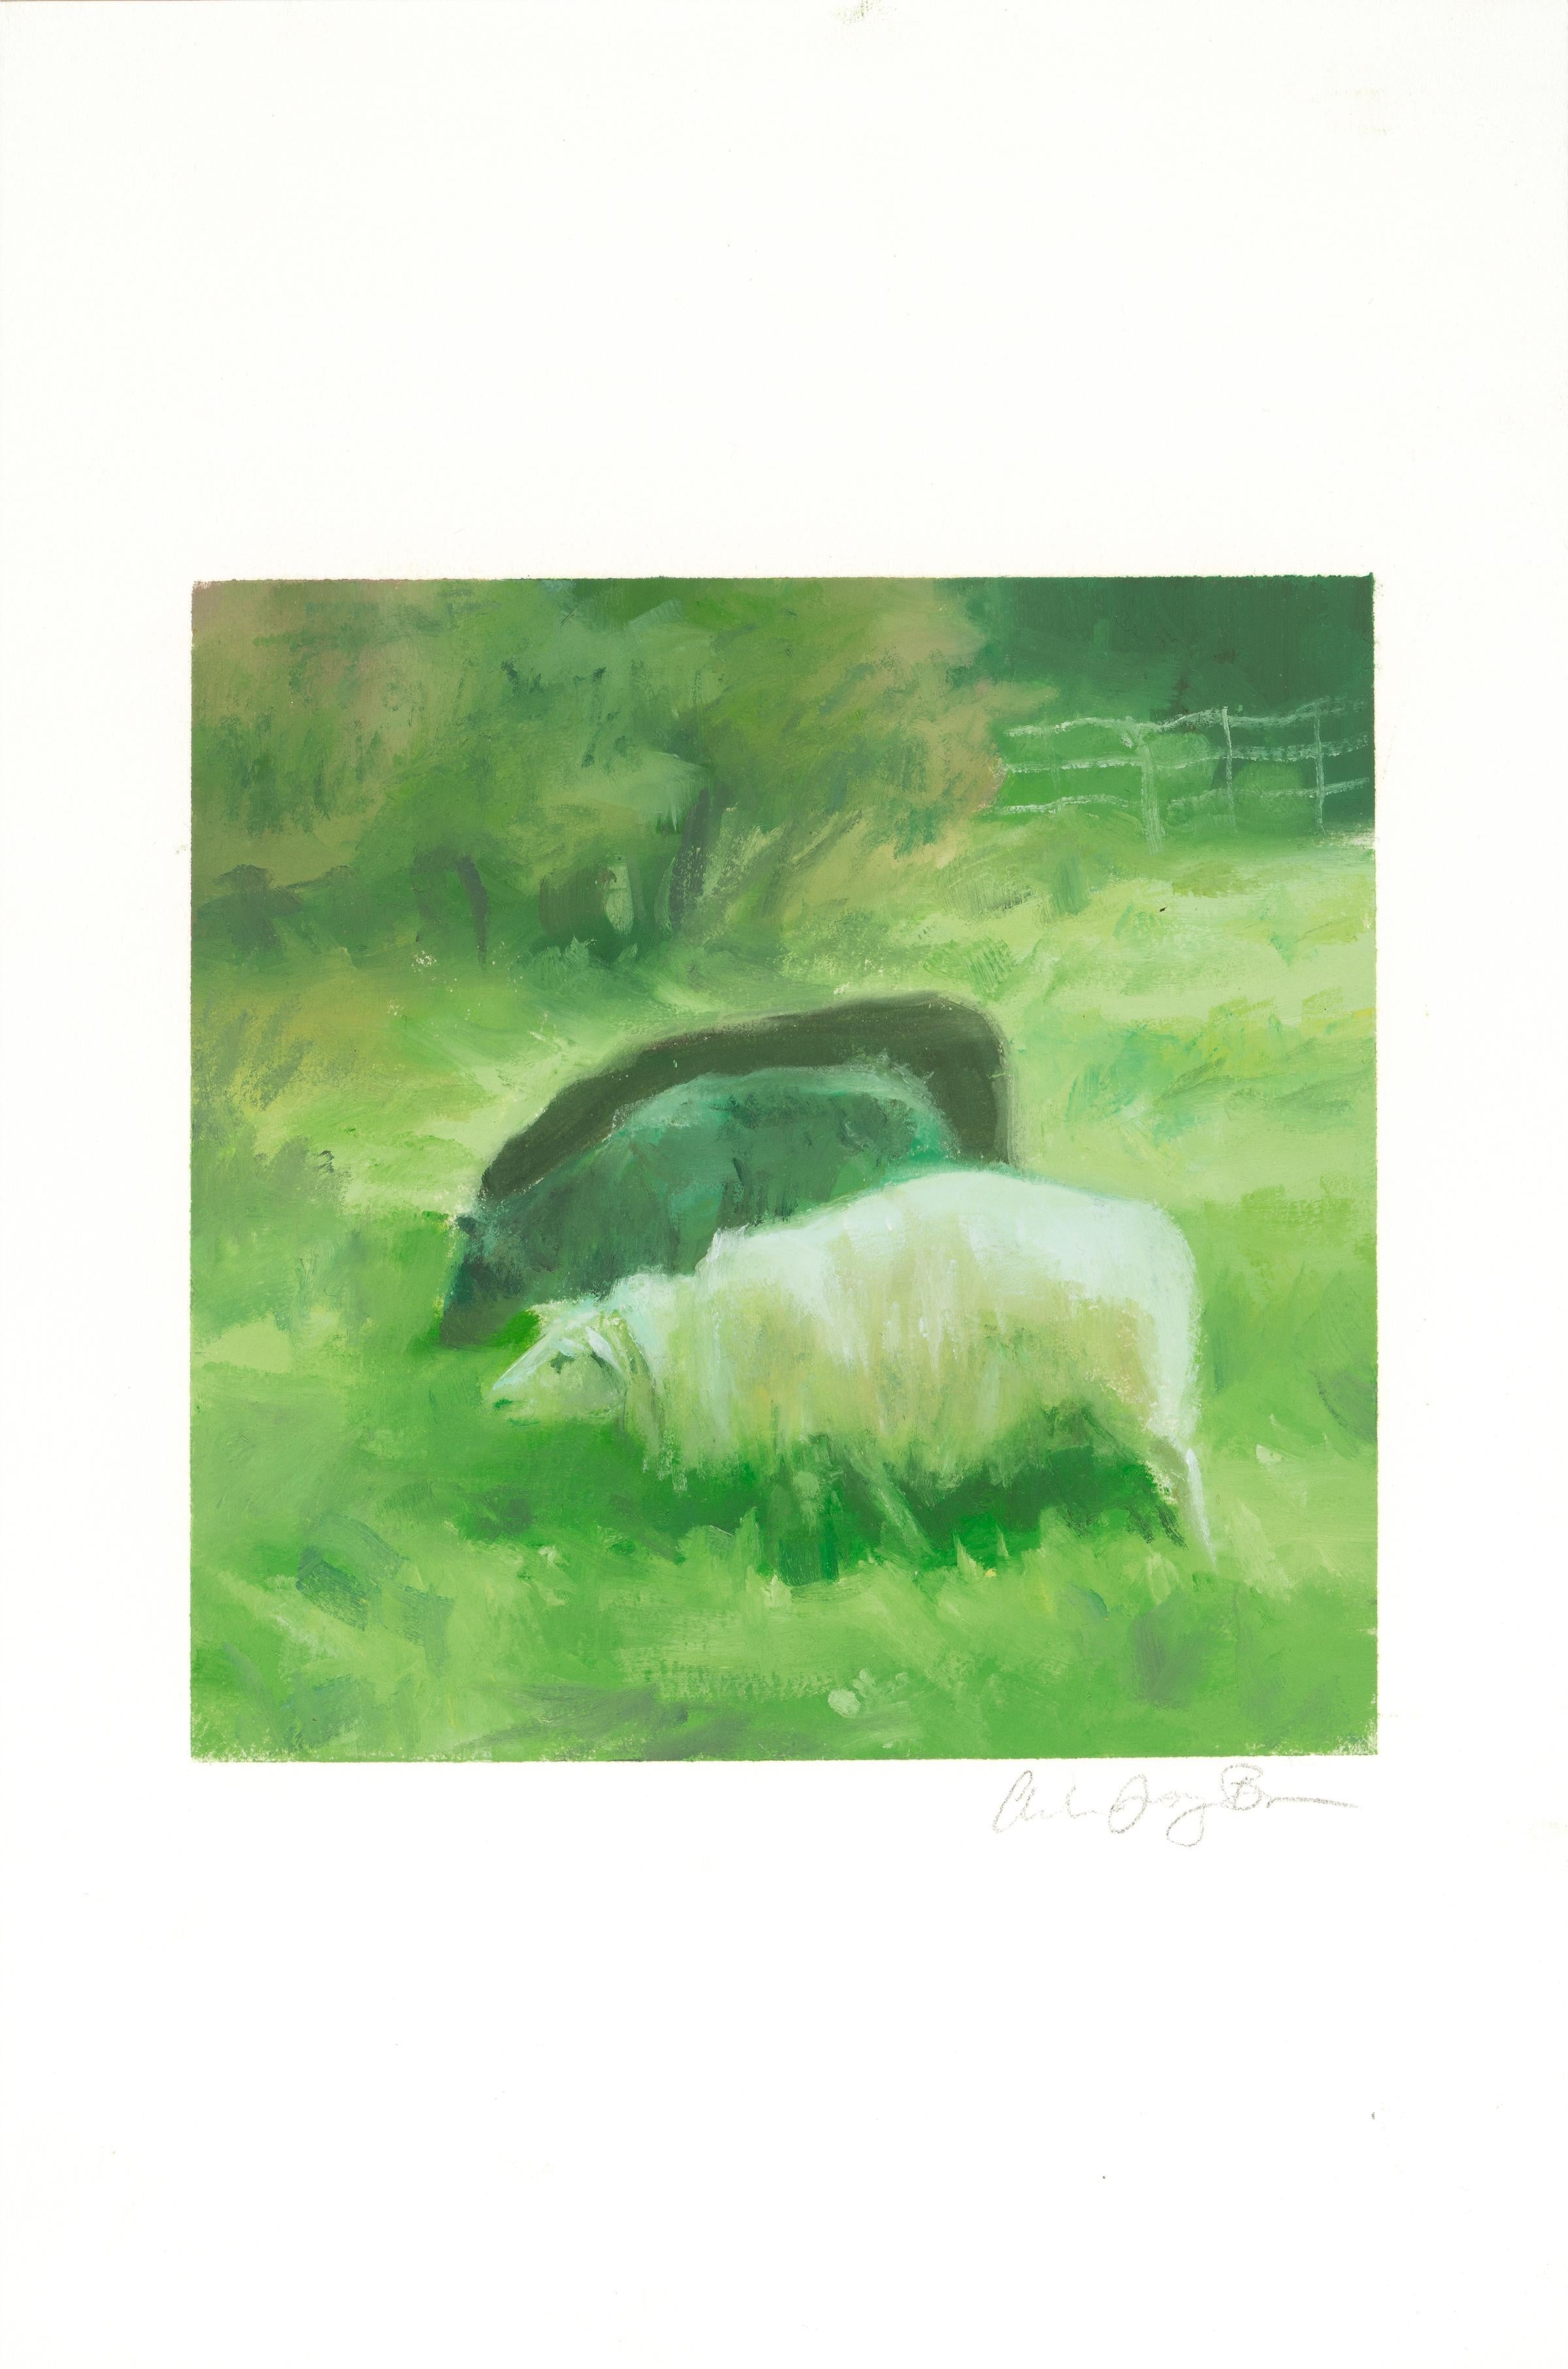 Sheep in Meadow | Phthalo Green Landscape Painting w/ Animals in Grassy Field